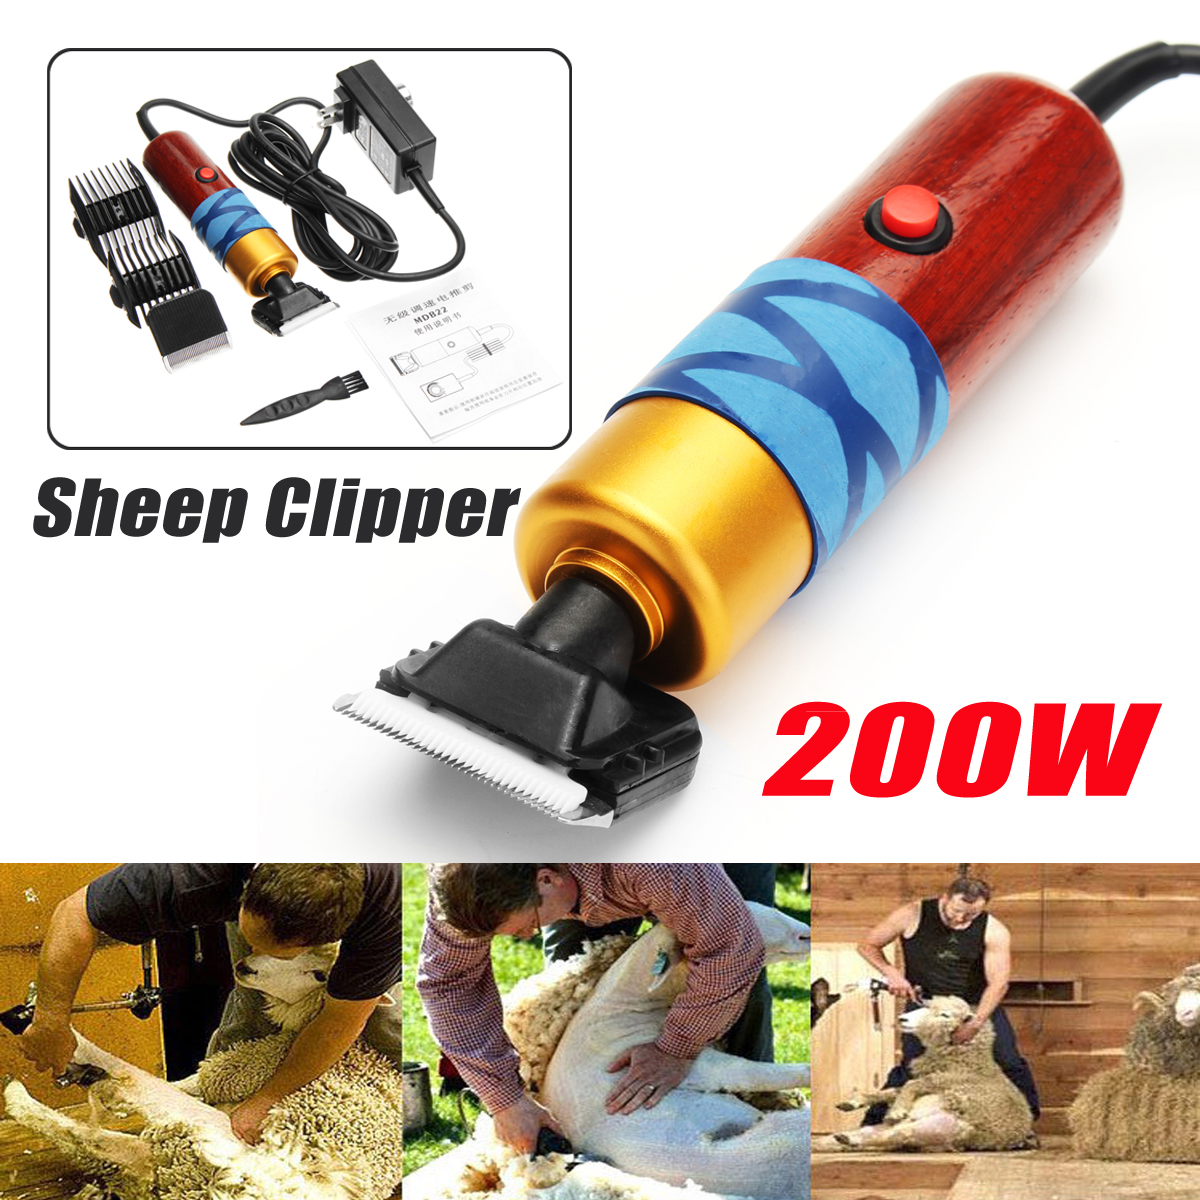 200W-Sheep-Clipper-Professional-Dog-Grooming-Kit-For-Rabbit-Pet-Dog-Grooming-Tools-1279973-2